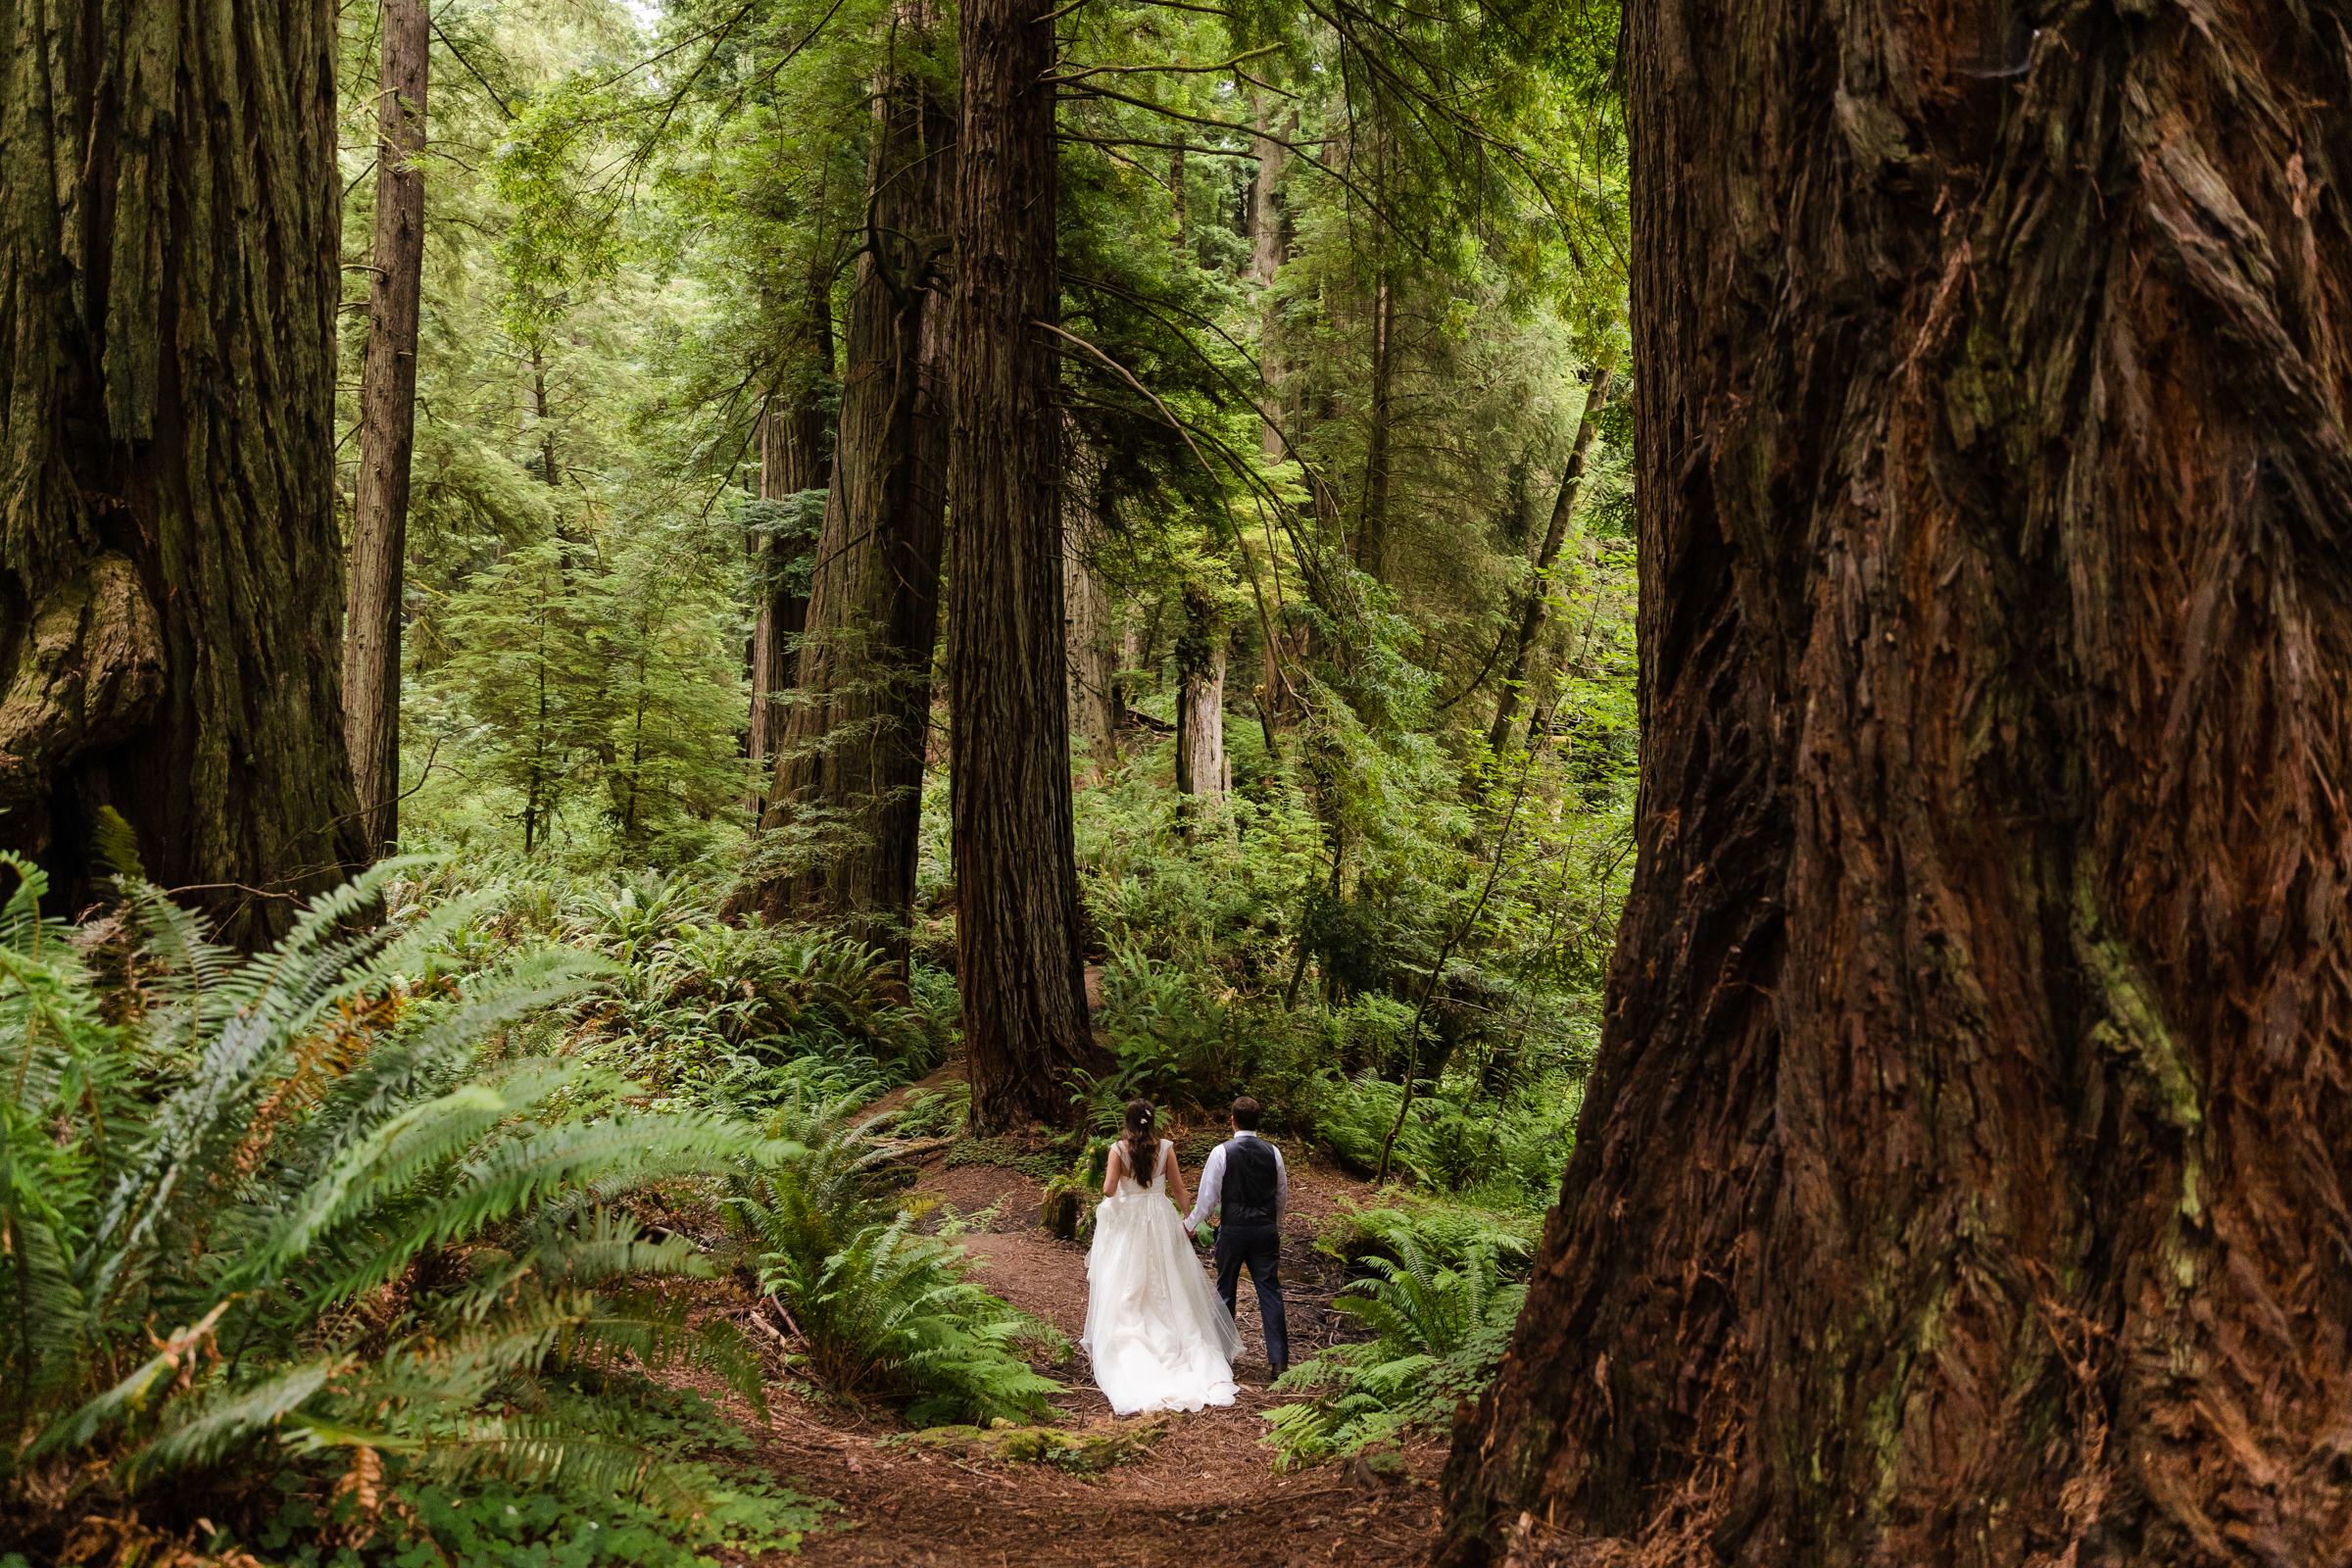 A couple in wedding attire walking through a beautiful redwoods grove on their elopement day.